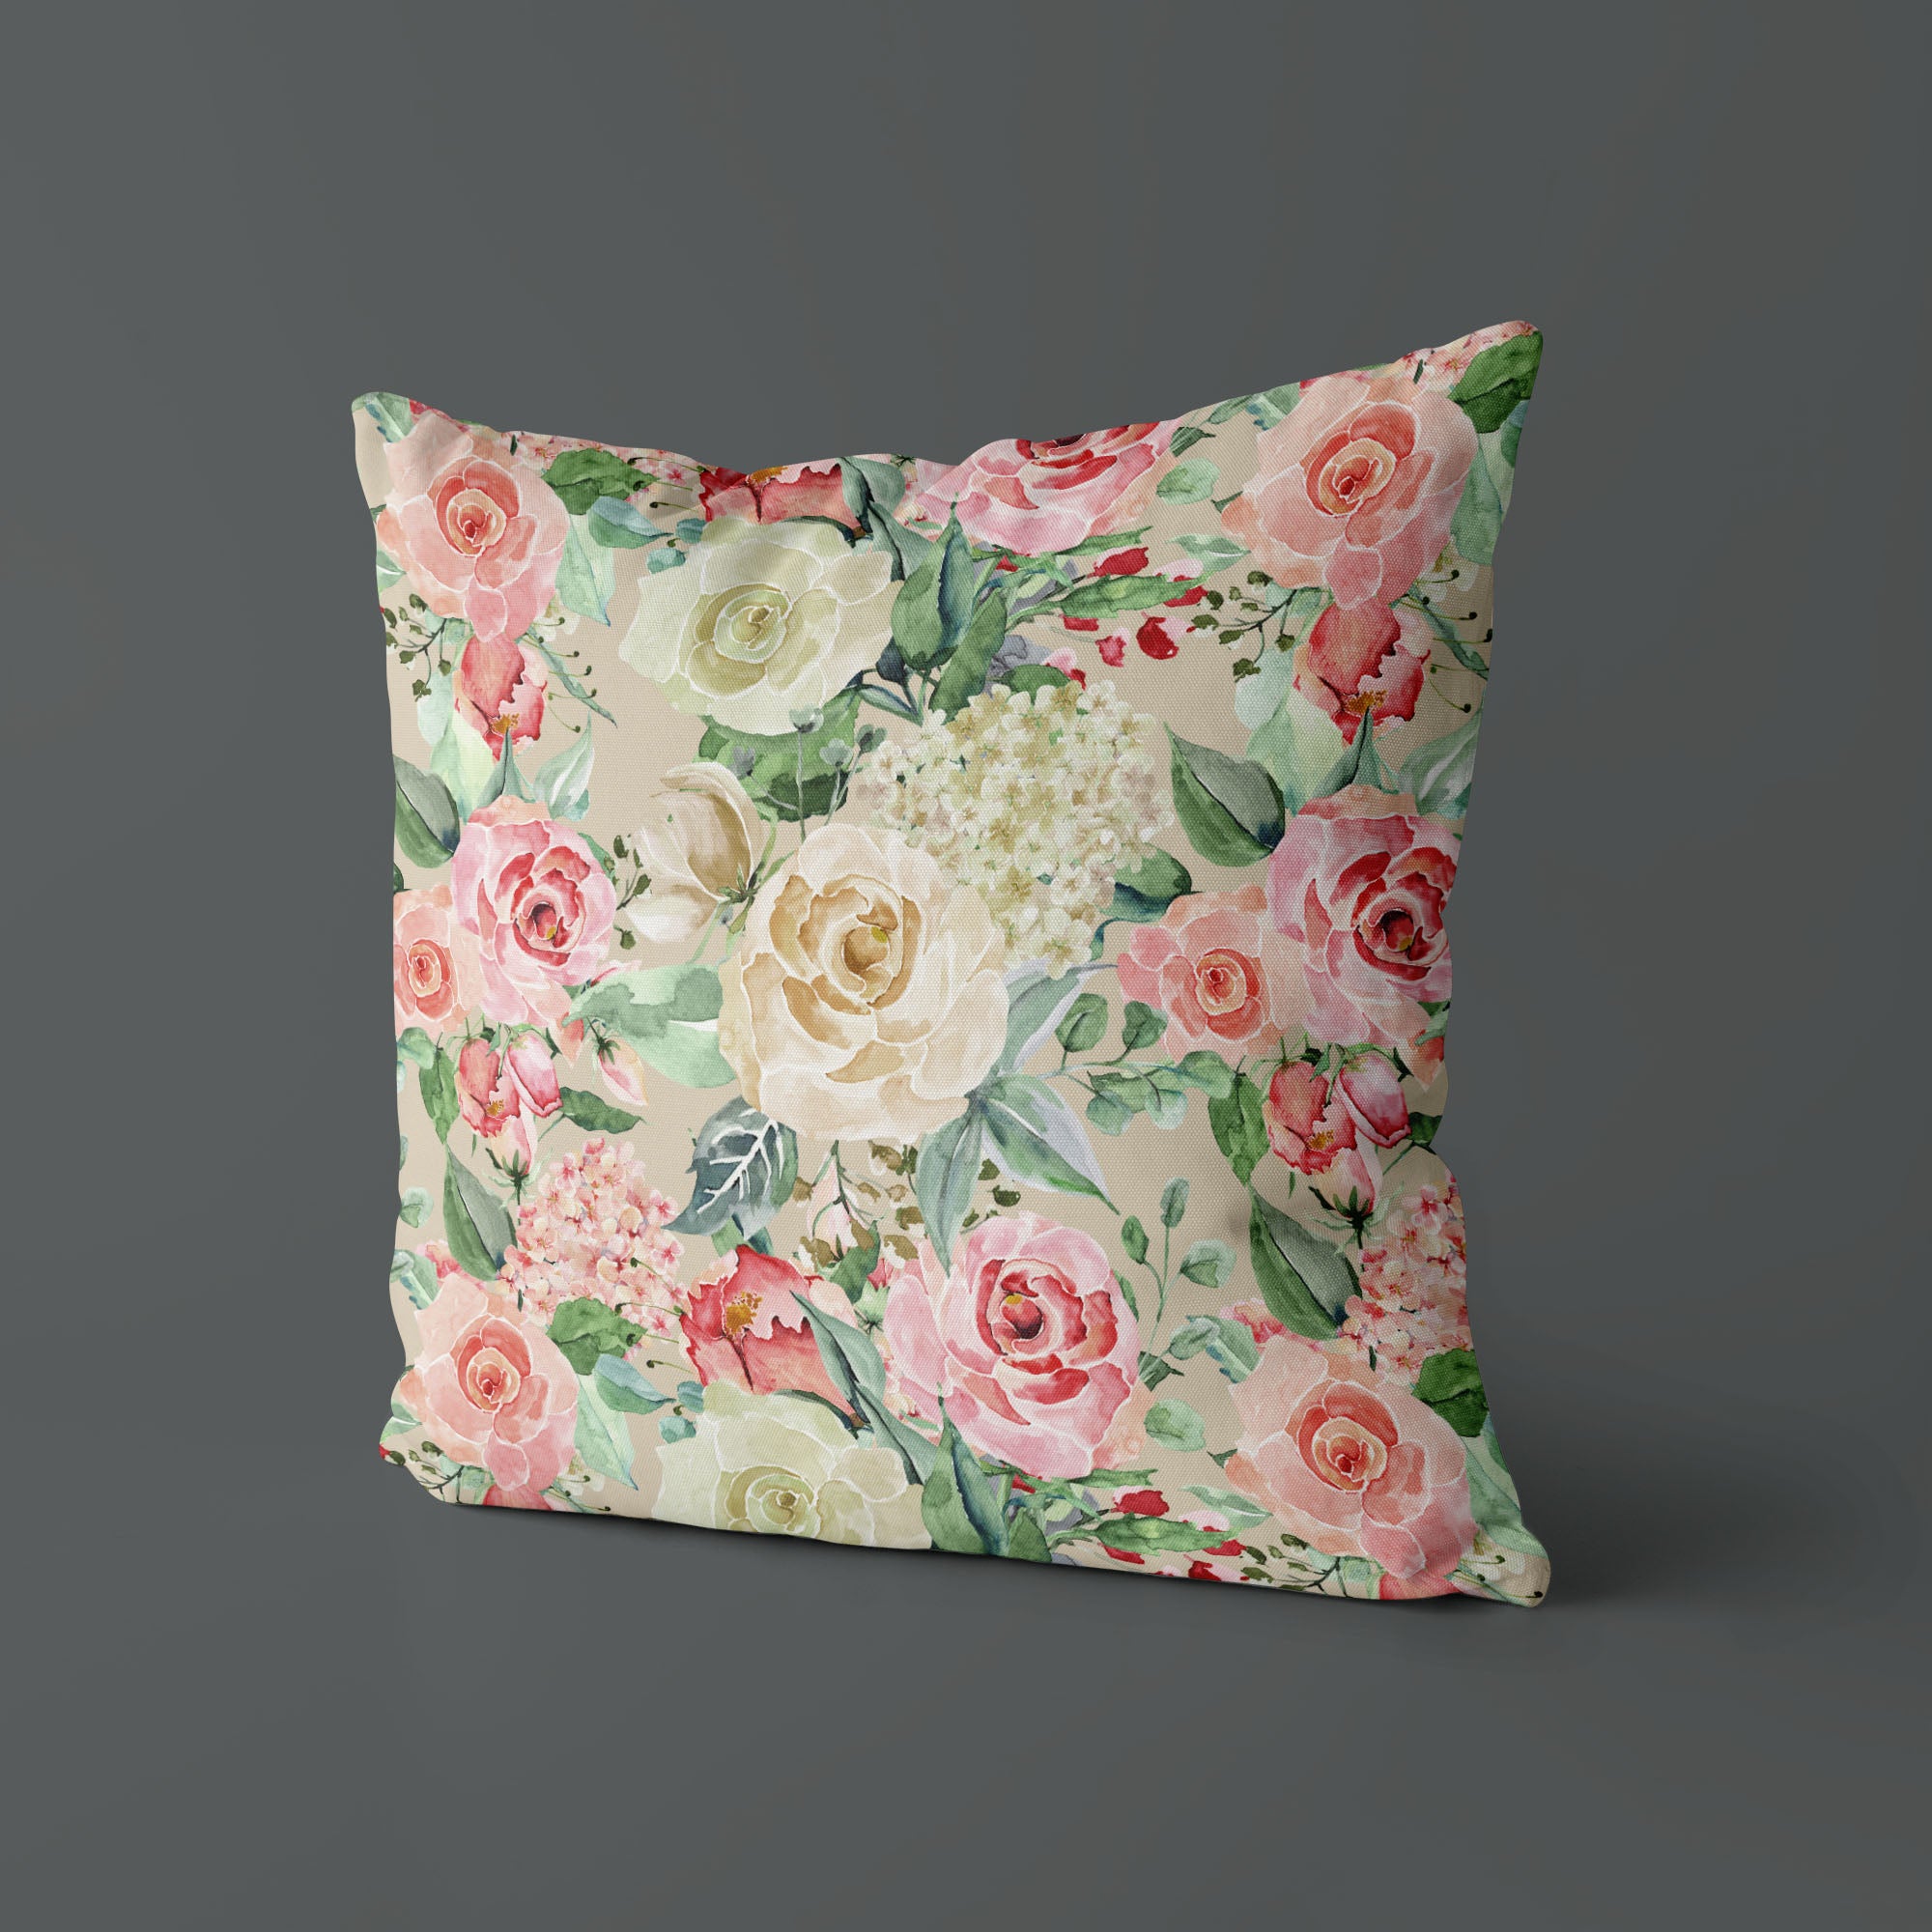 Floral Kids & Nursery Throw Pillow - Blossom in Nature